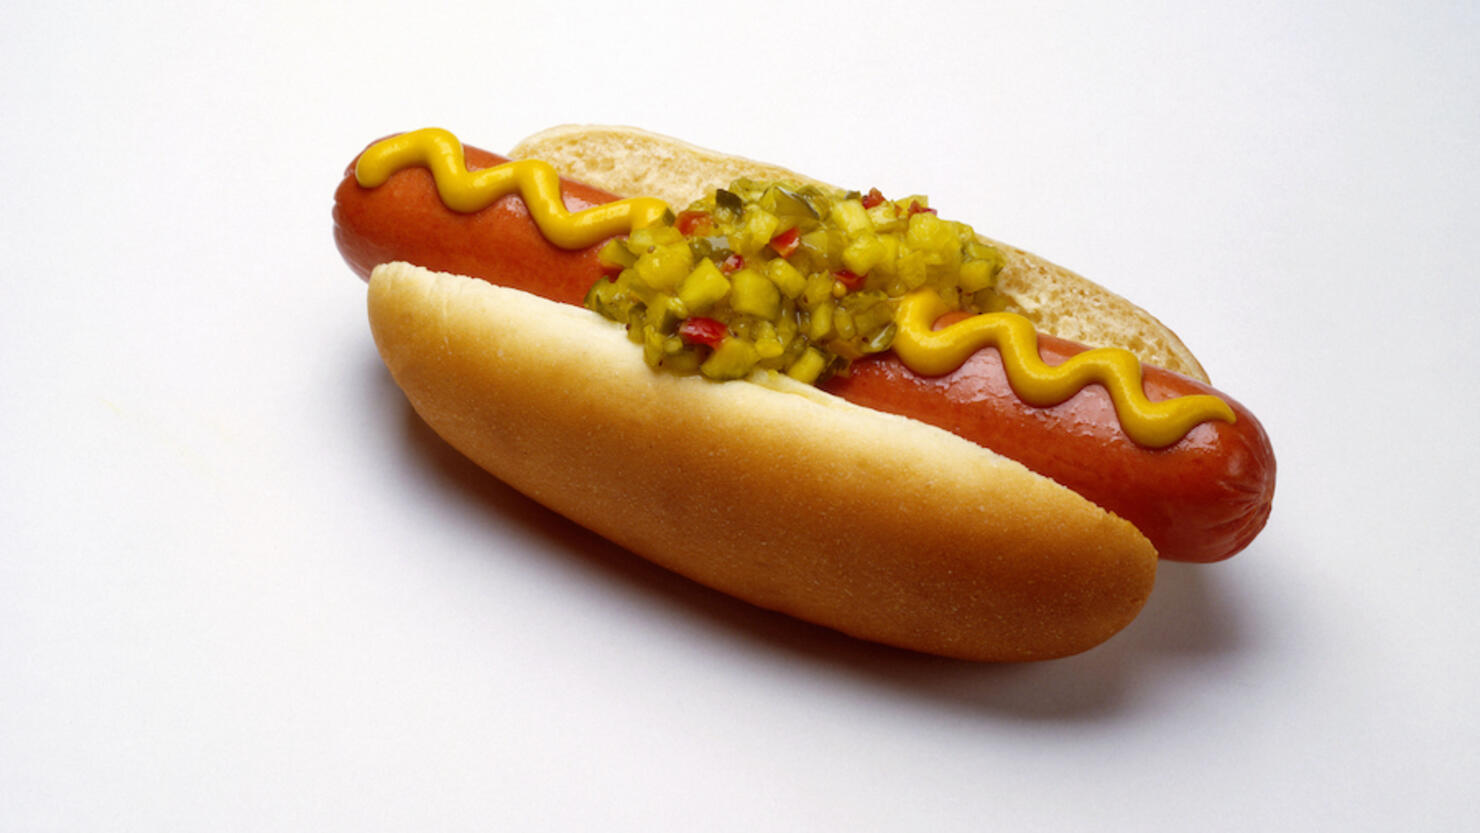 Hot dog with mustard and relish